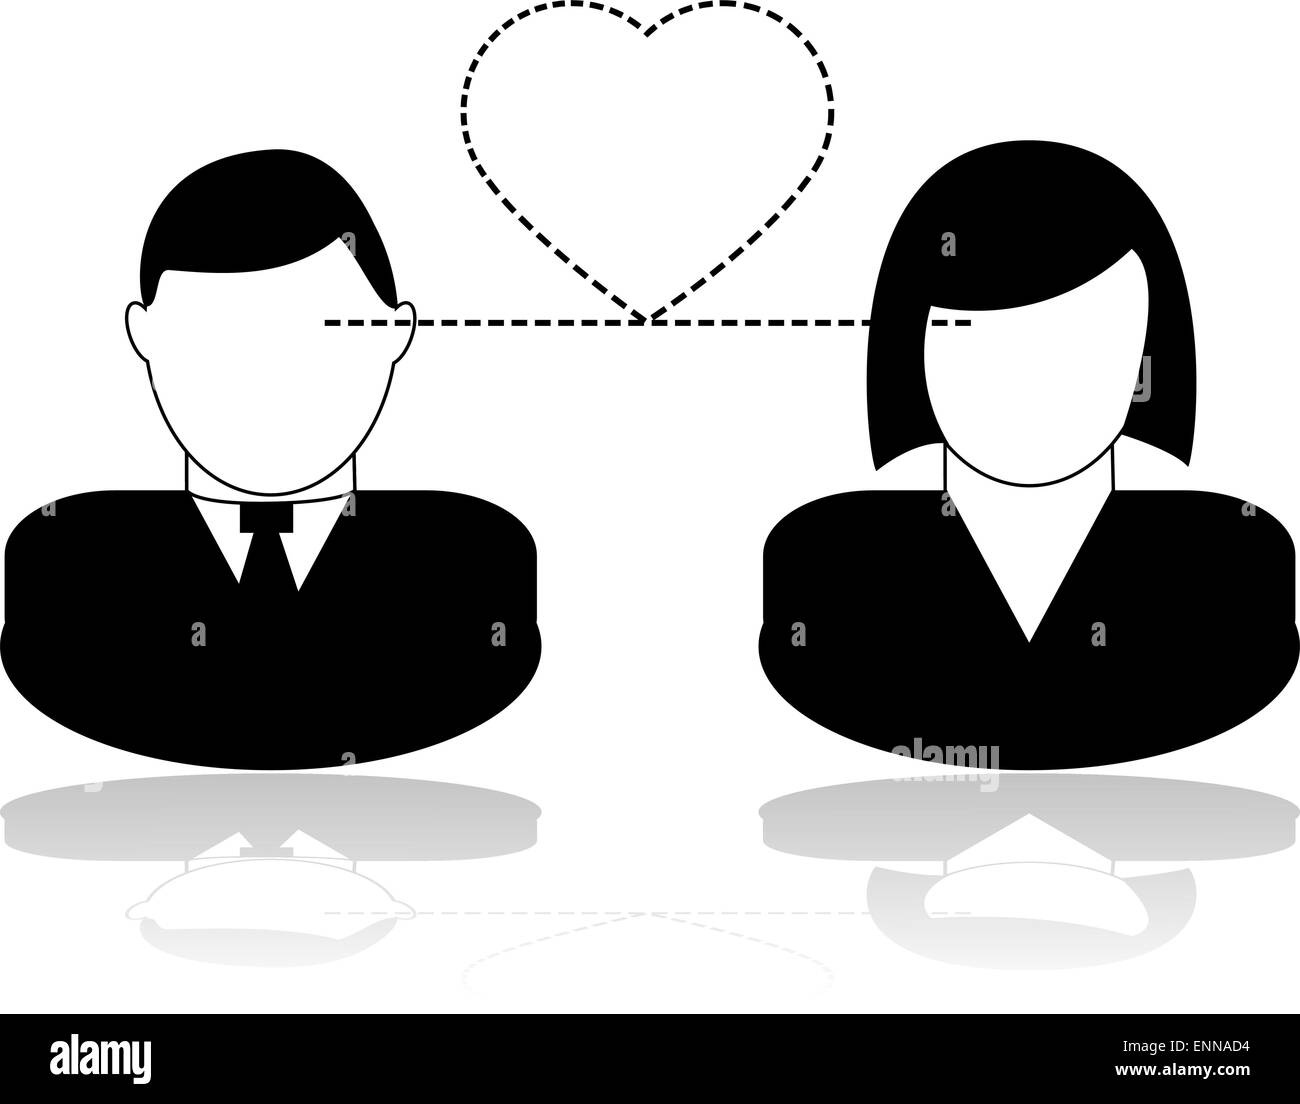 Love at first sight Stock Vector